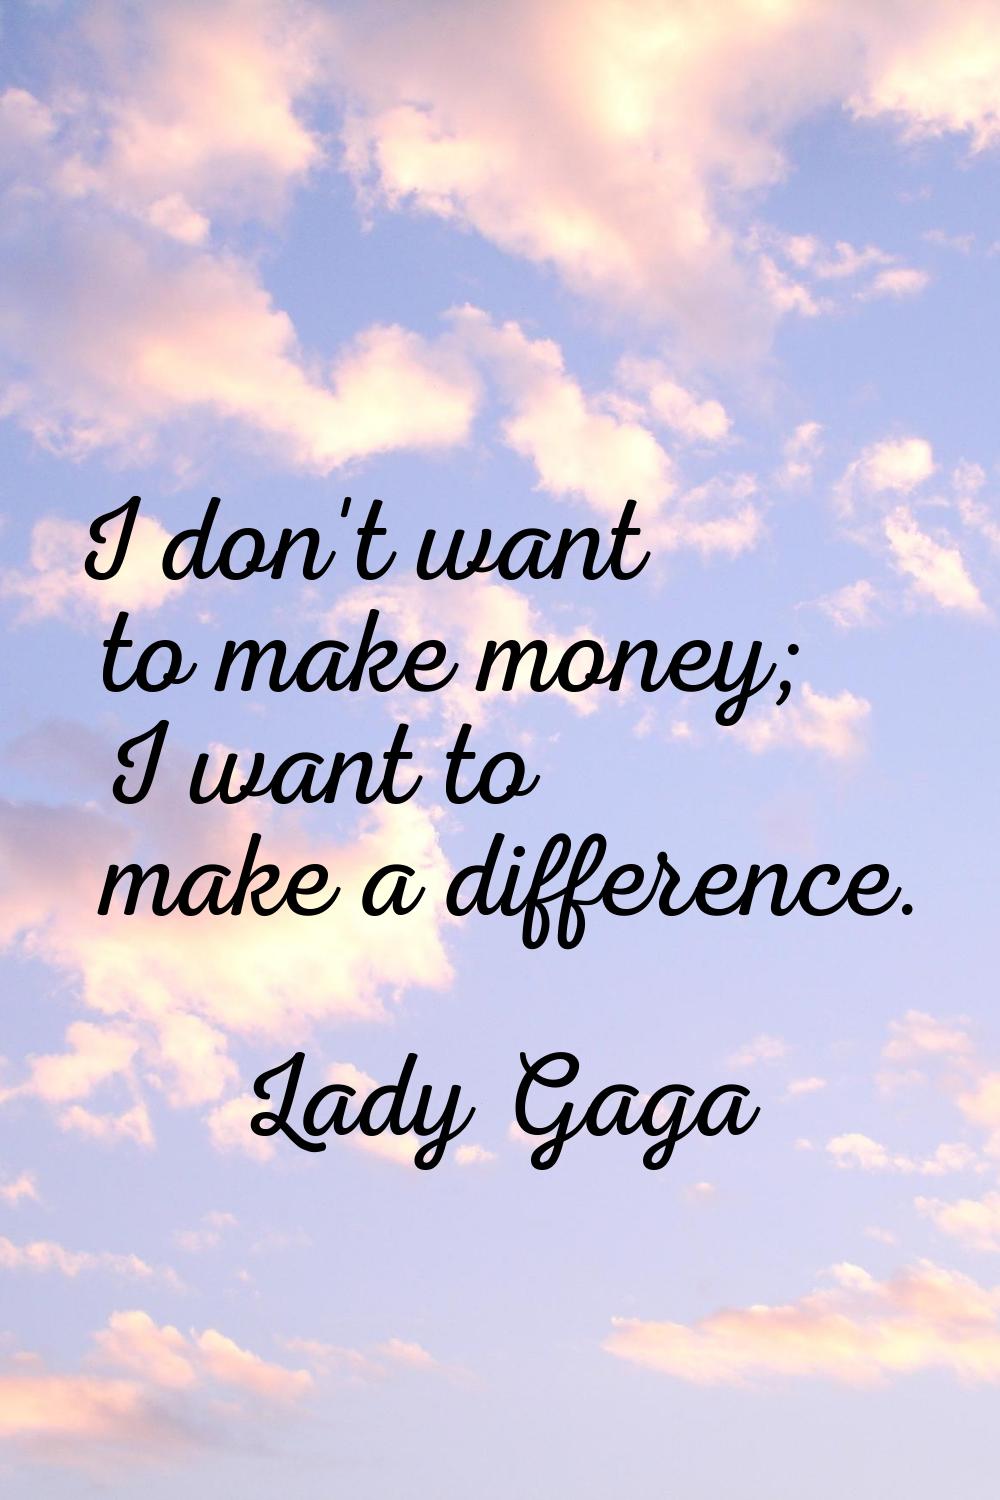 I don't want to make money; I want to make a difference.